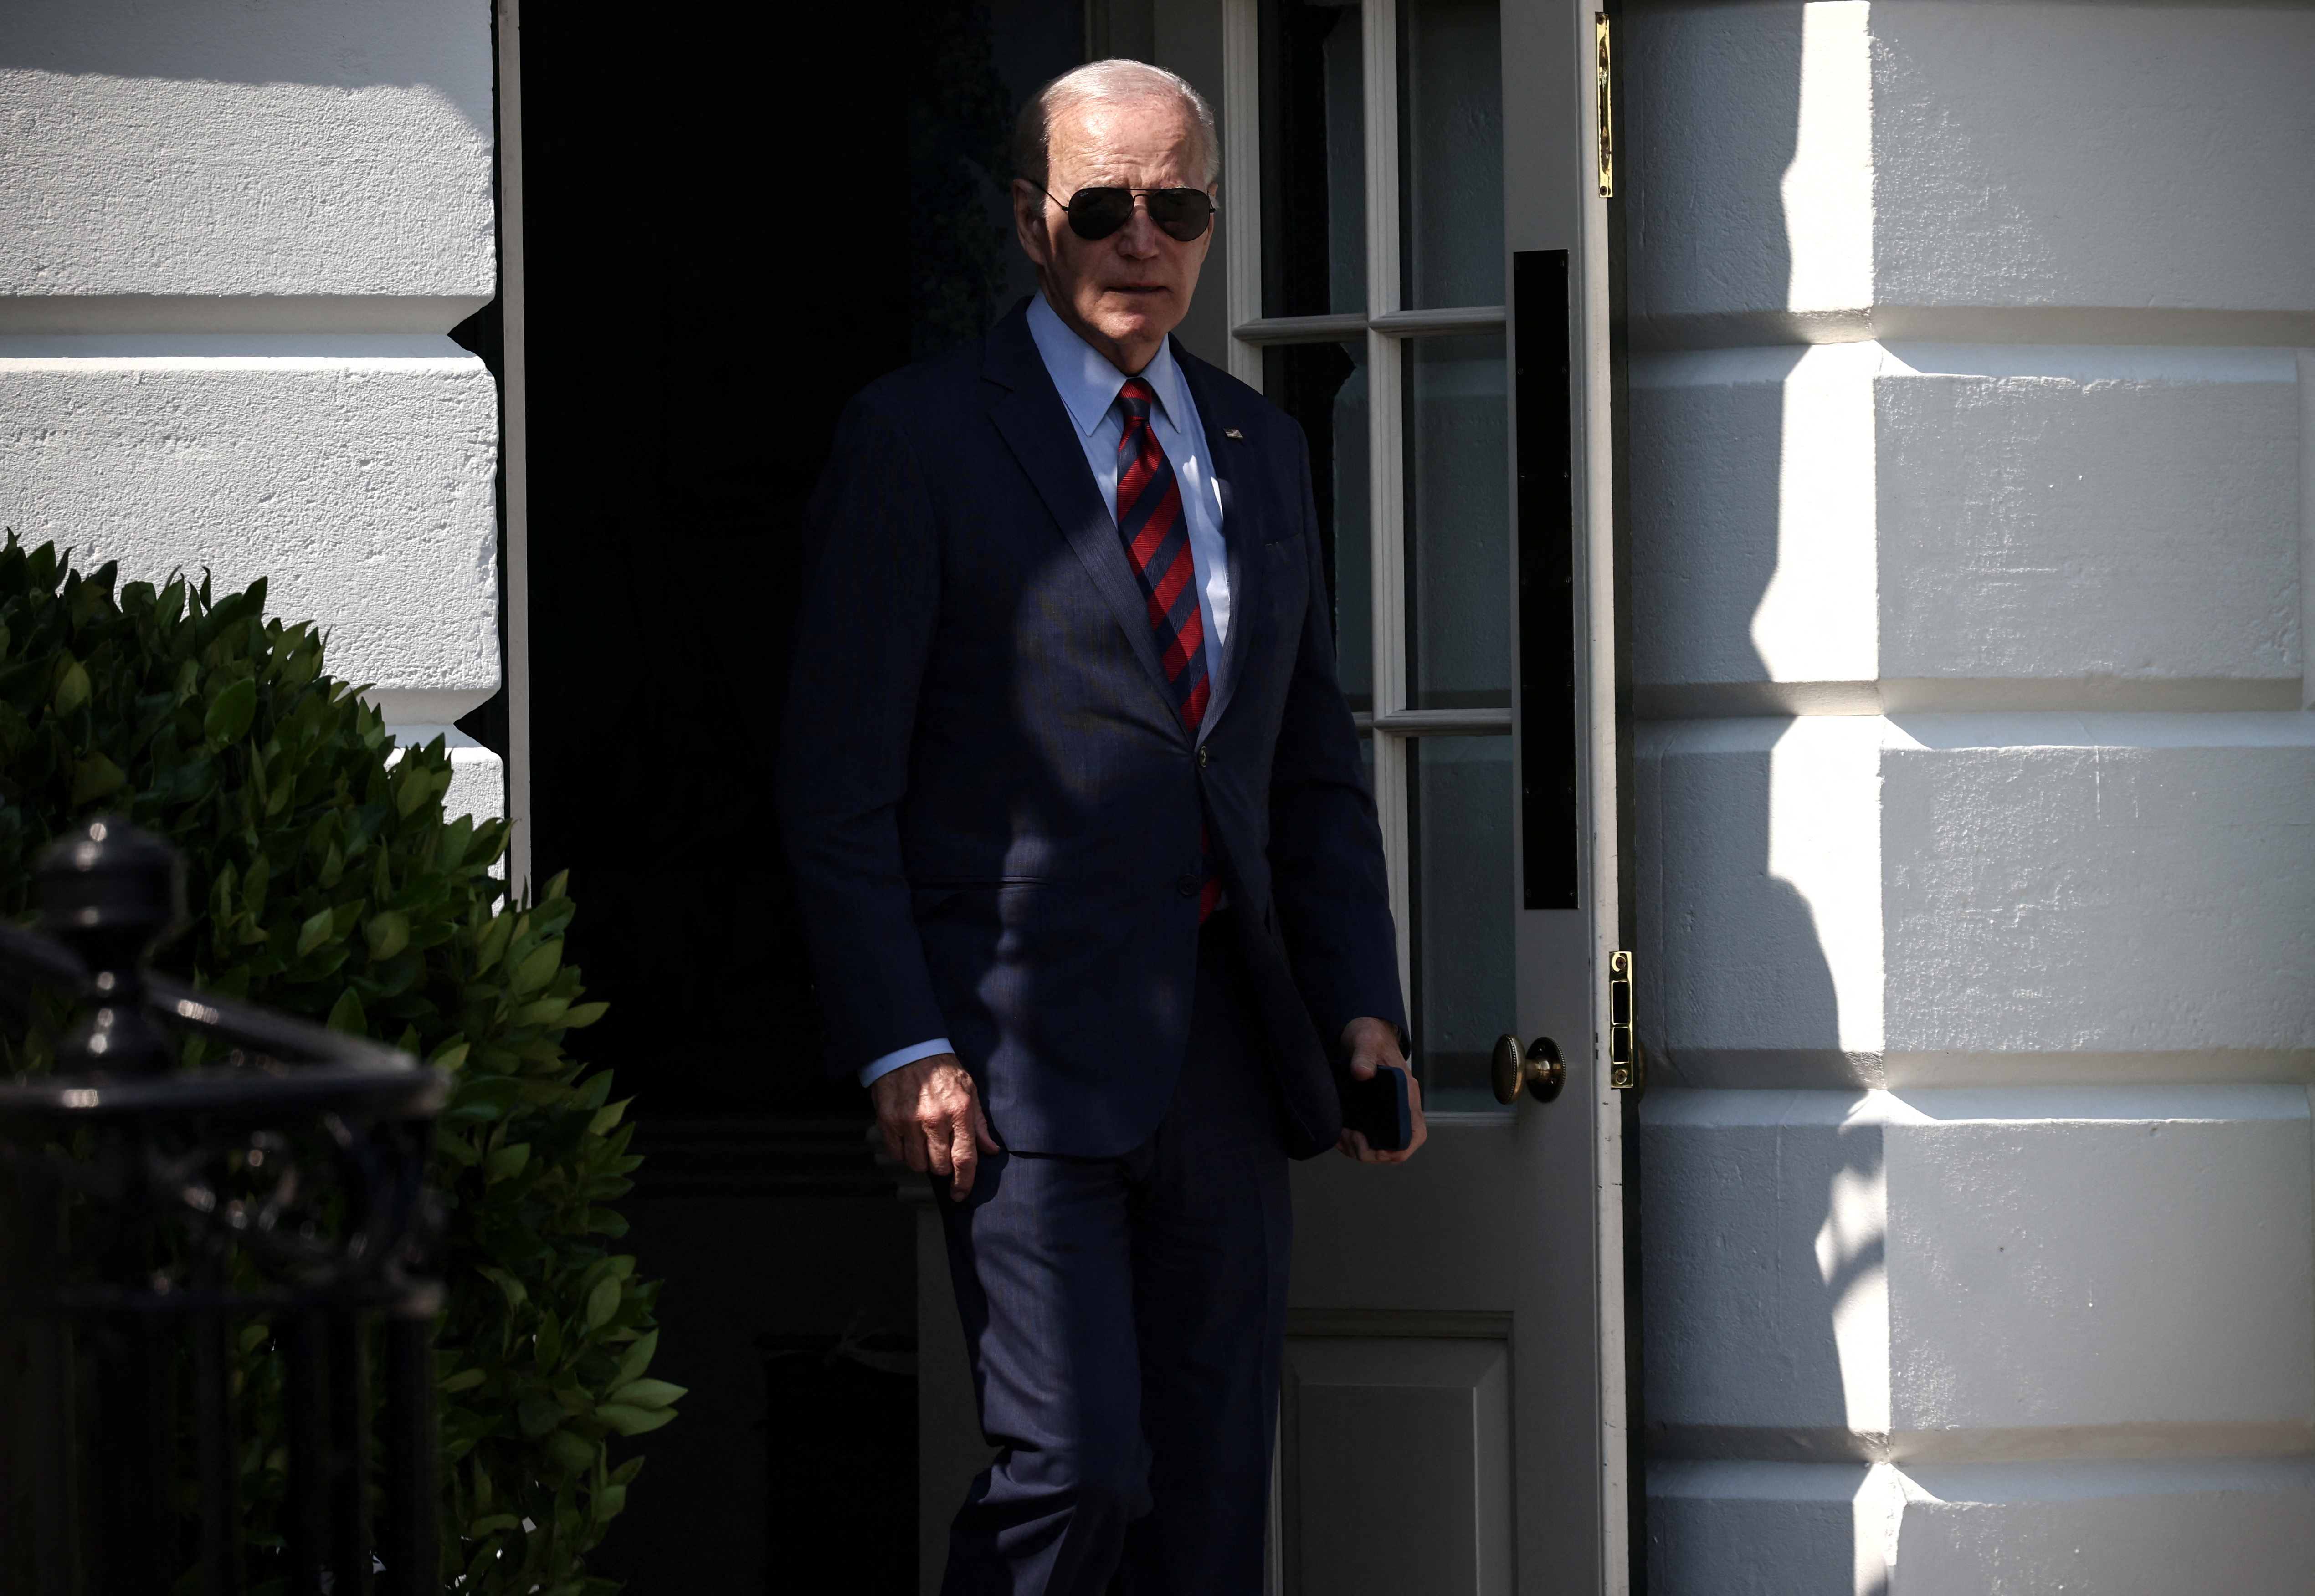 Biden departs for Colorado from the White House in Washington